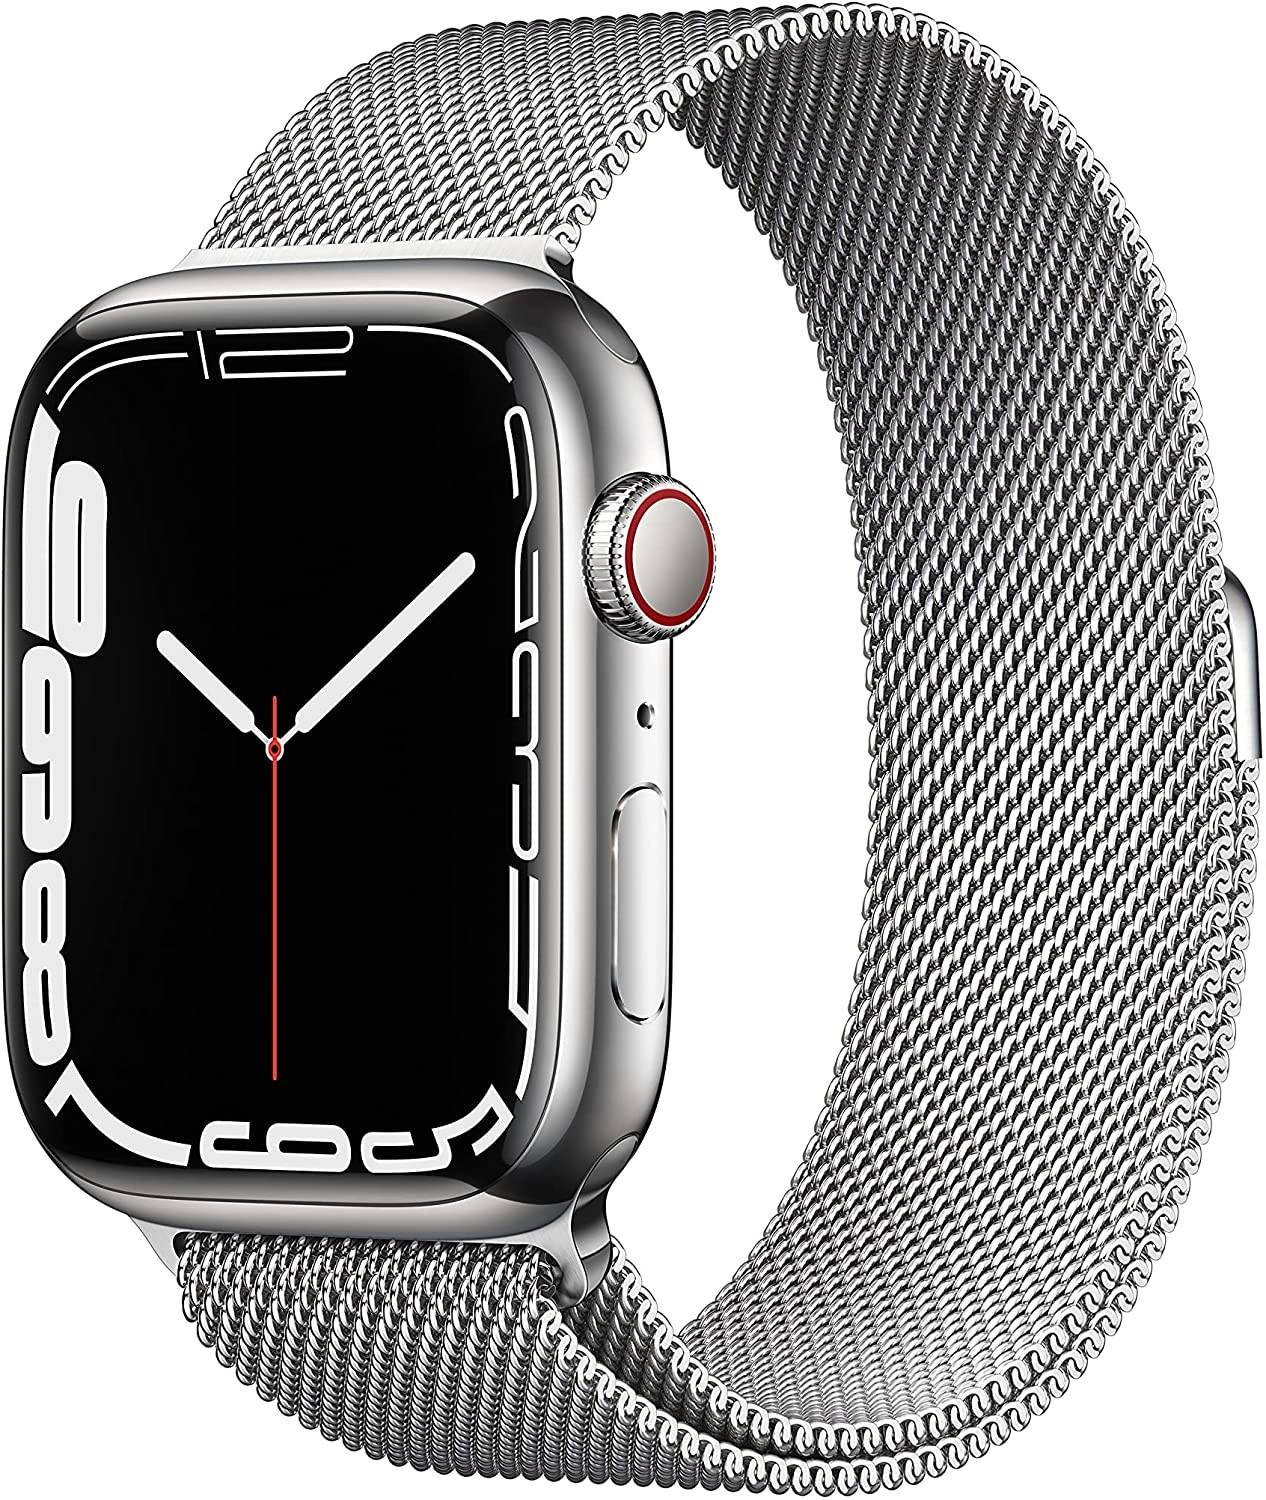 Apple Watch Series 7 with Silver Stainless Steel Case and Silver Milanese Loop